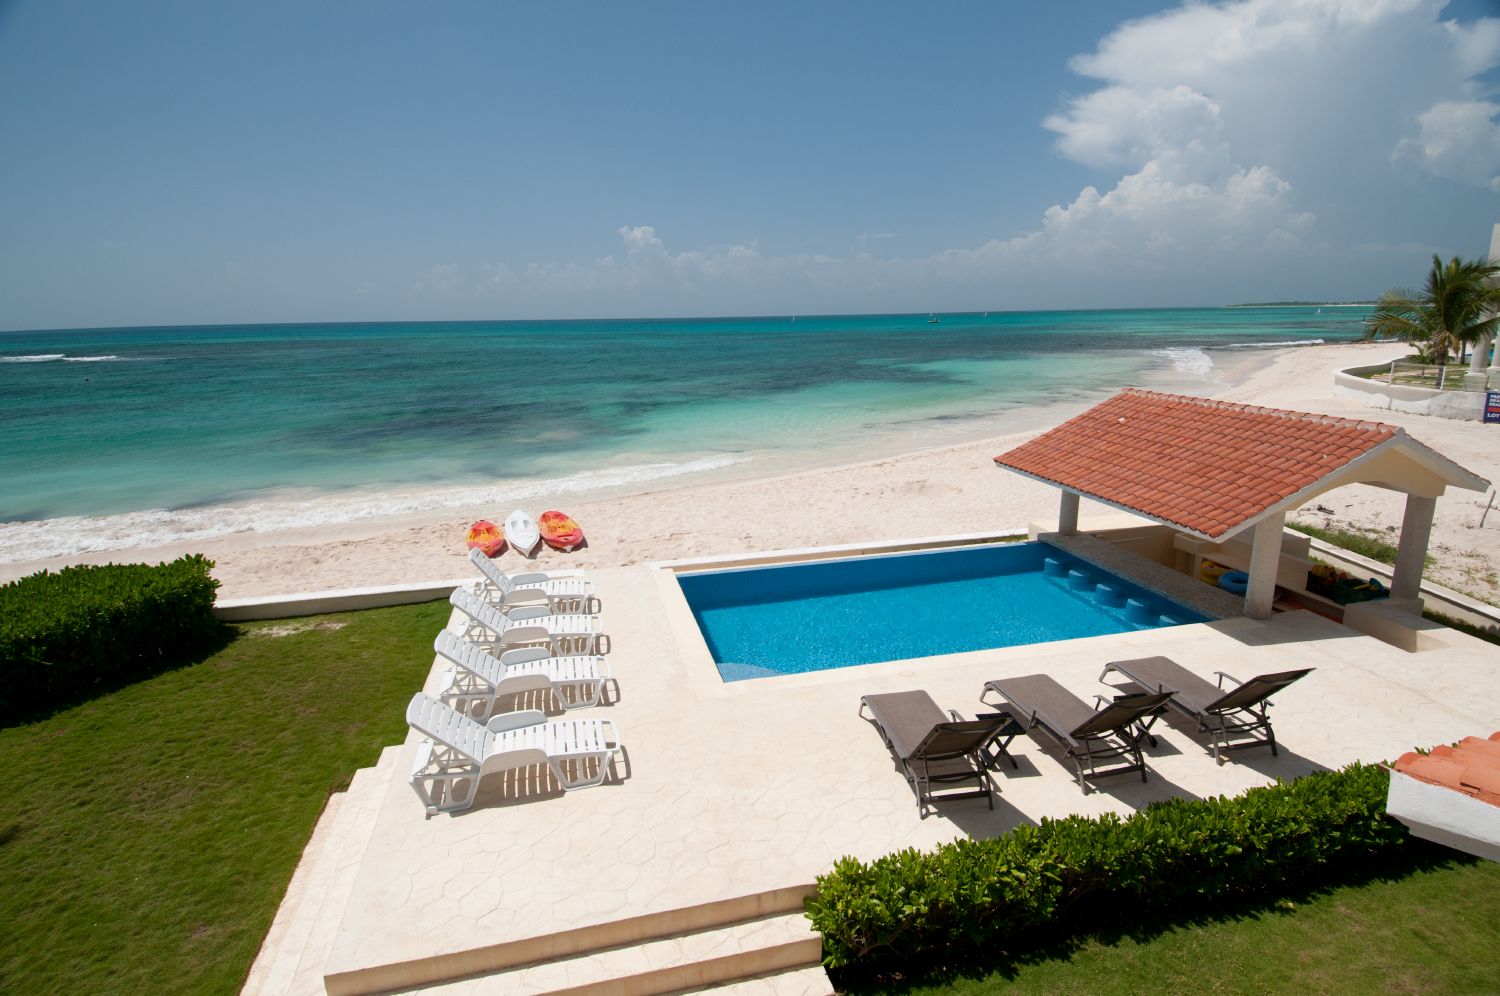 Bed and breakfast in Mexico - Quintana Roo - Mayan Riviera - Inn 454 - 20